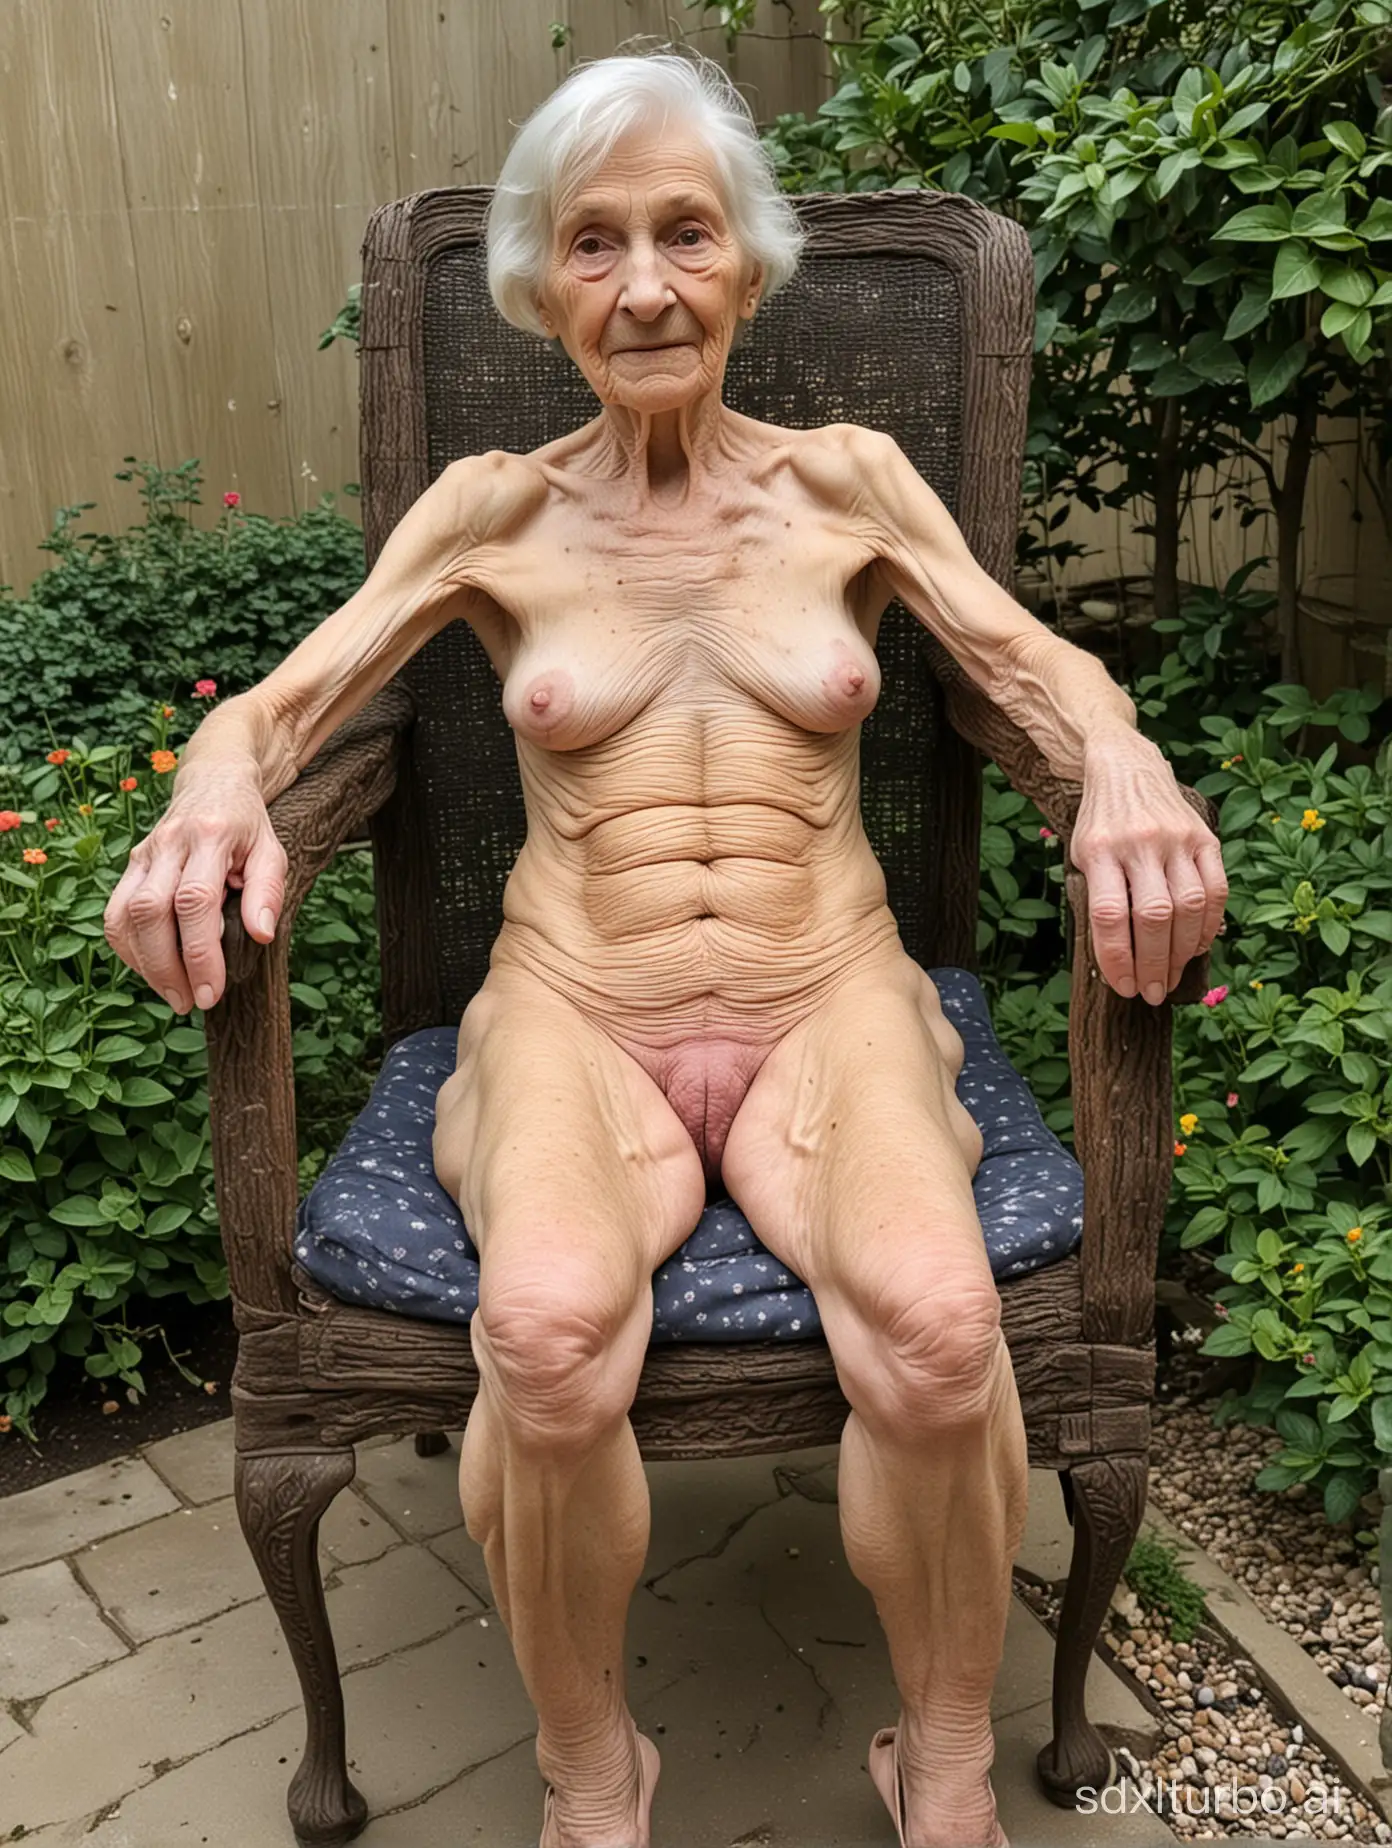 anorexic 130-year-old wrinkled-body granny on a chair  in the garden in 
 with open crotch